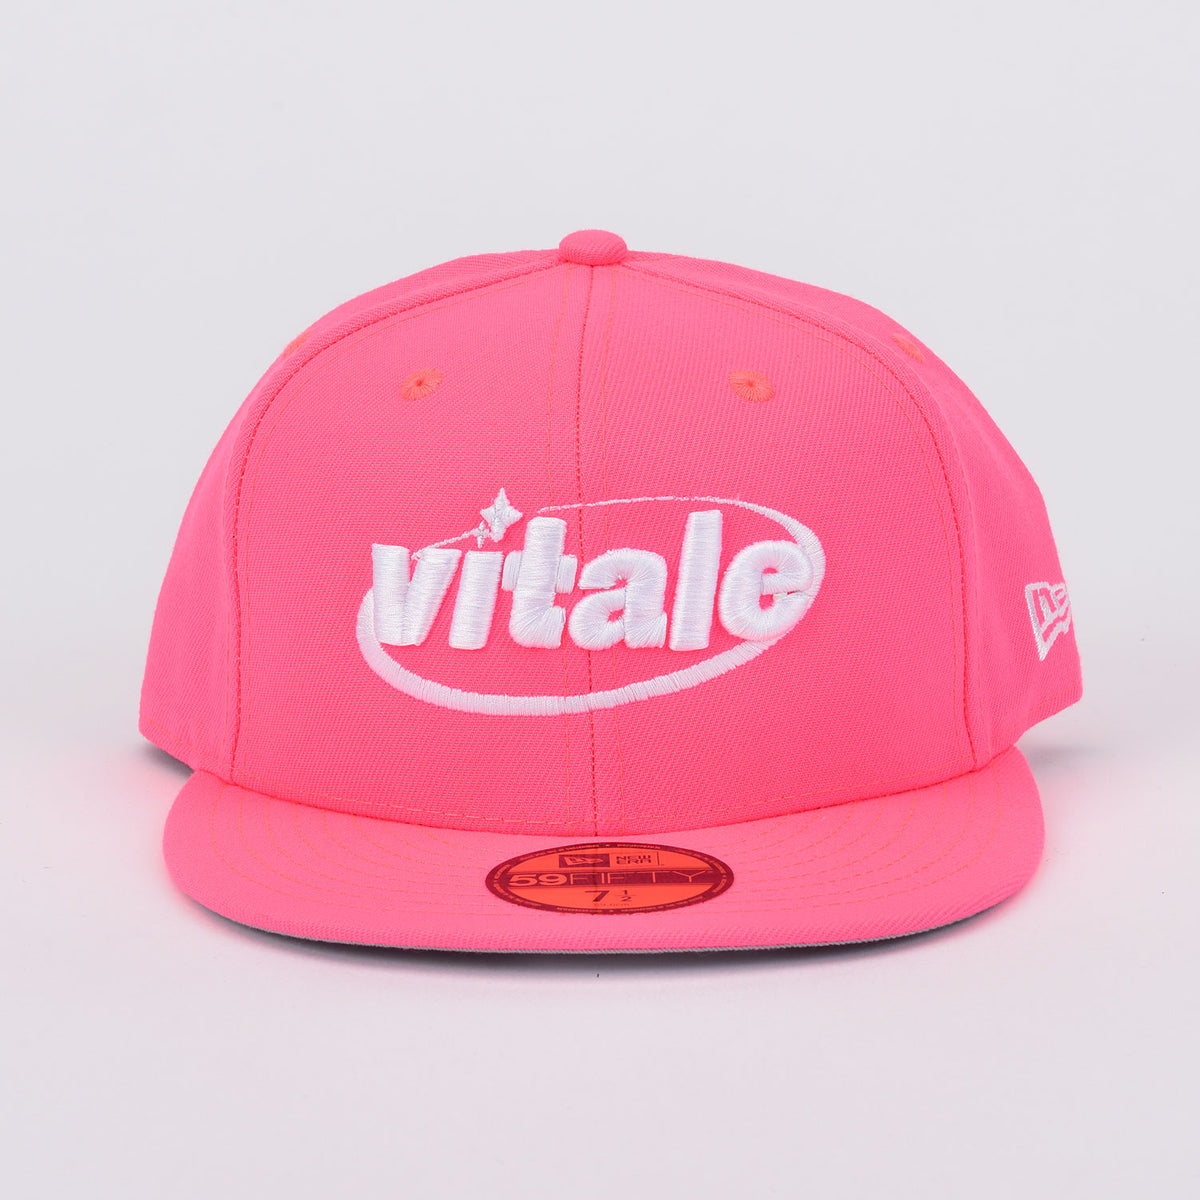 VITALE 59FIFTY NEW ERA FITTED HAT IN HIGHLIGHTER PINK – VITALE LLC